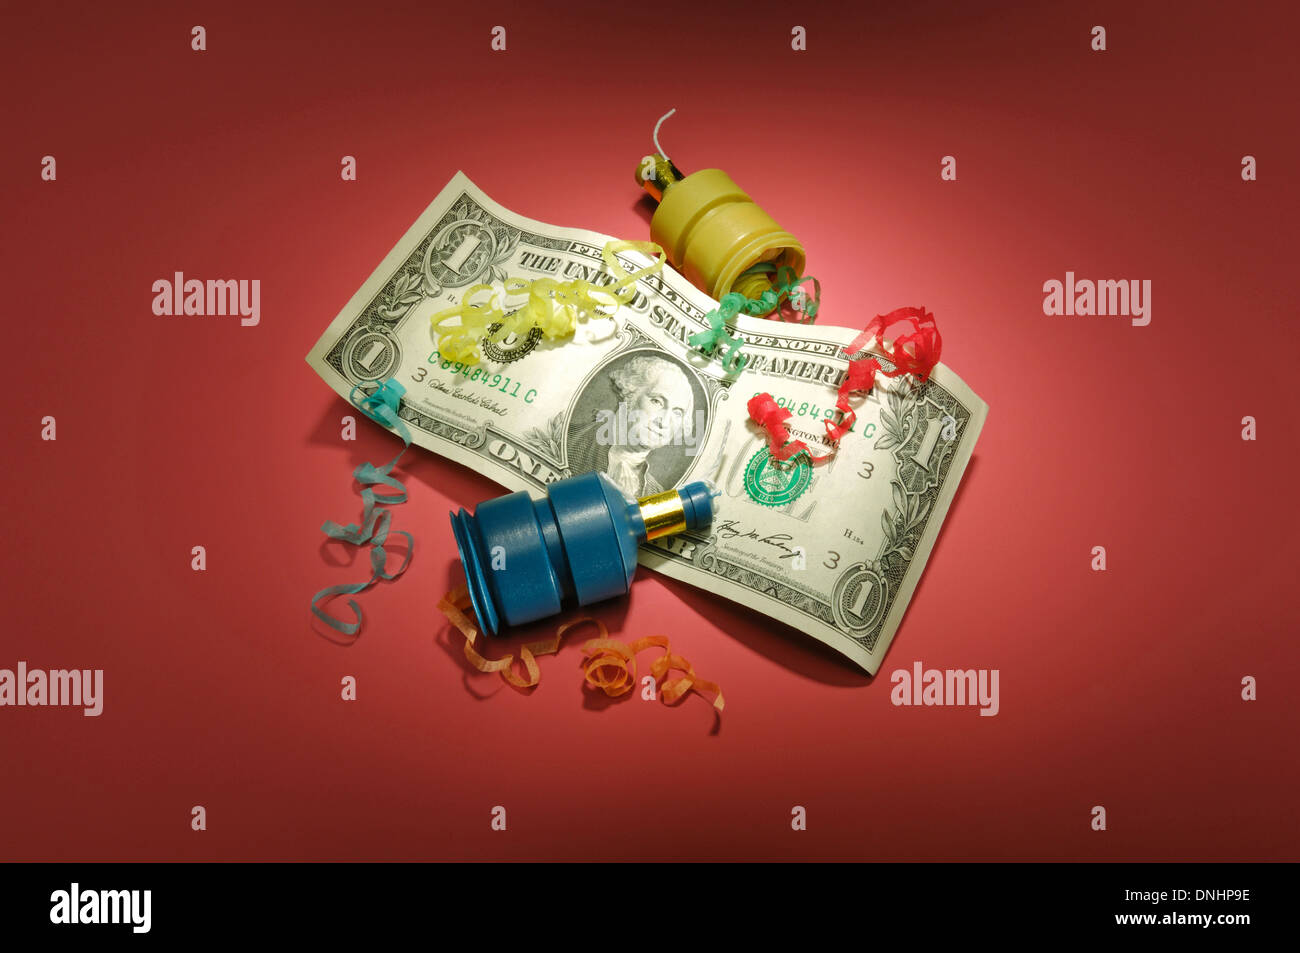 A US one dollar bill with party favors. Stock Photo